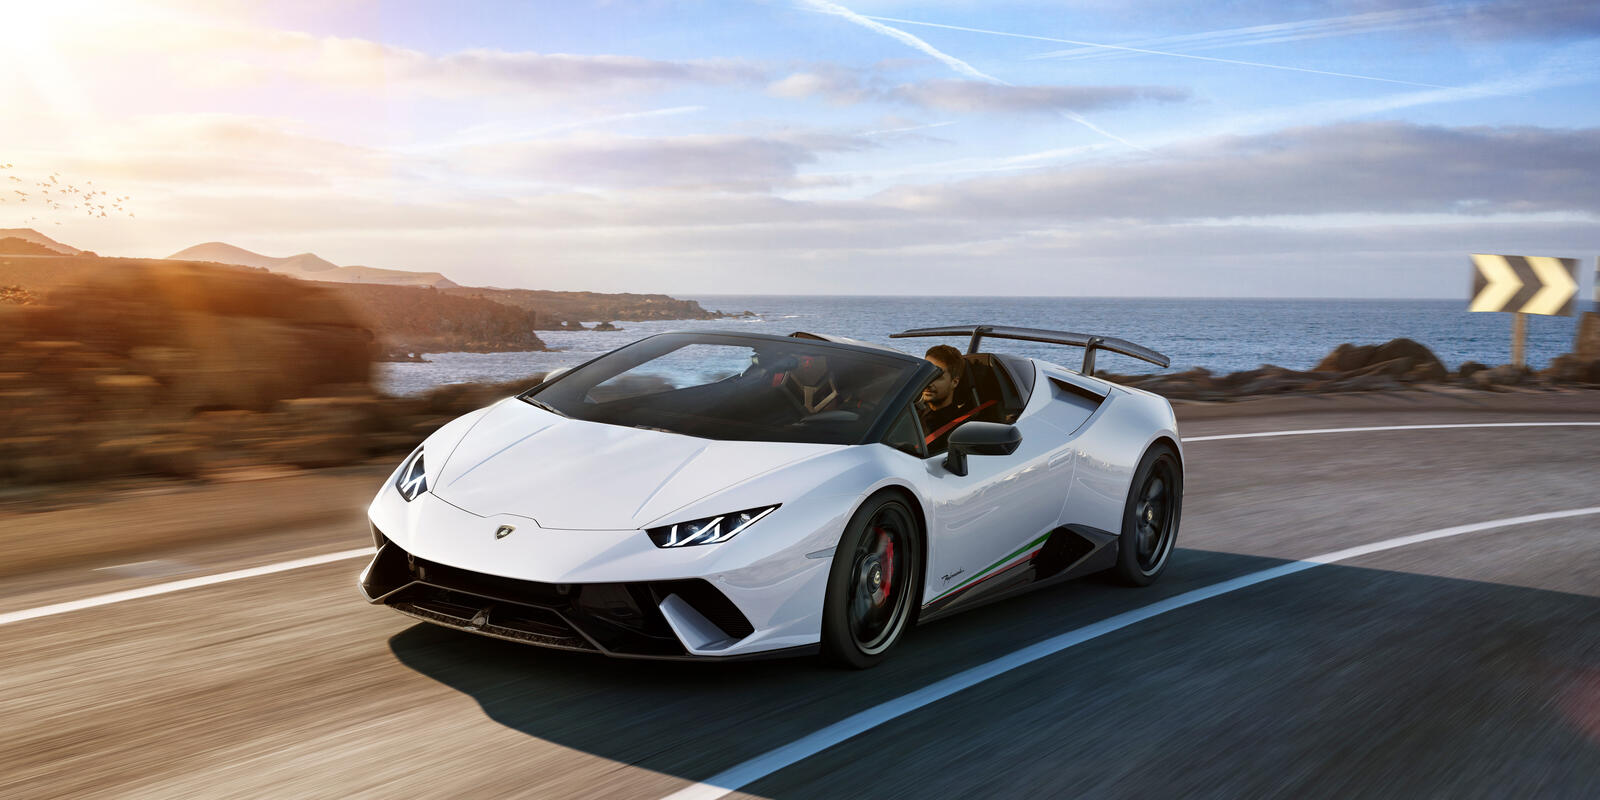 Free photo Lamborghini Huracan Performante Spyder on a country road